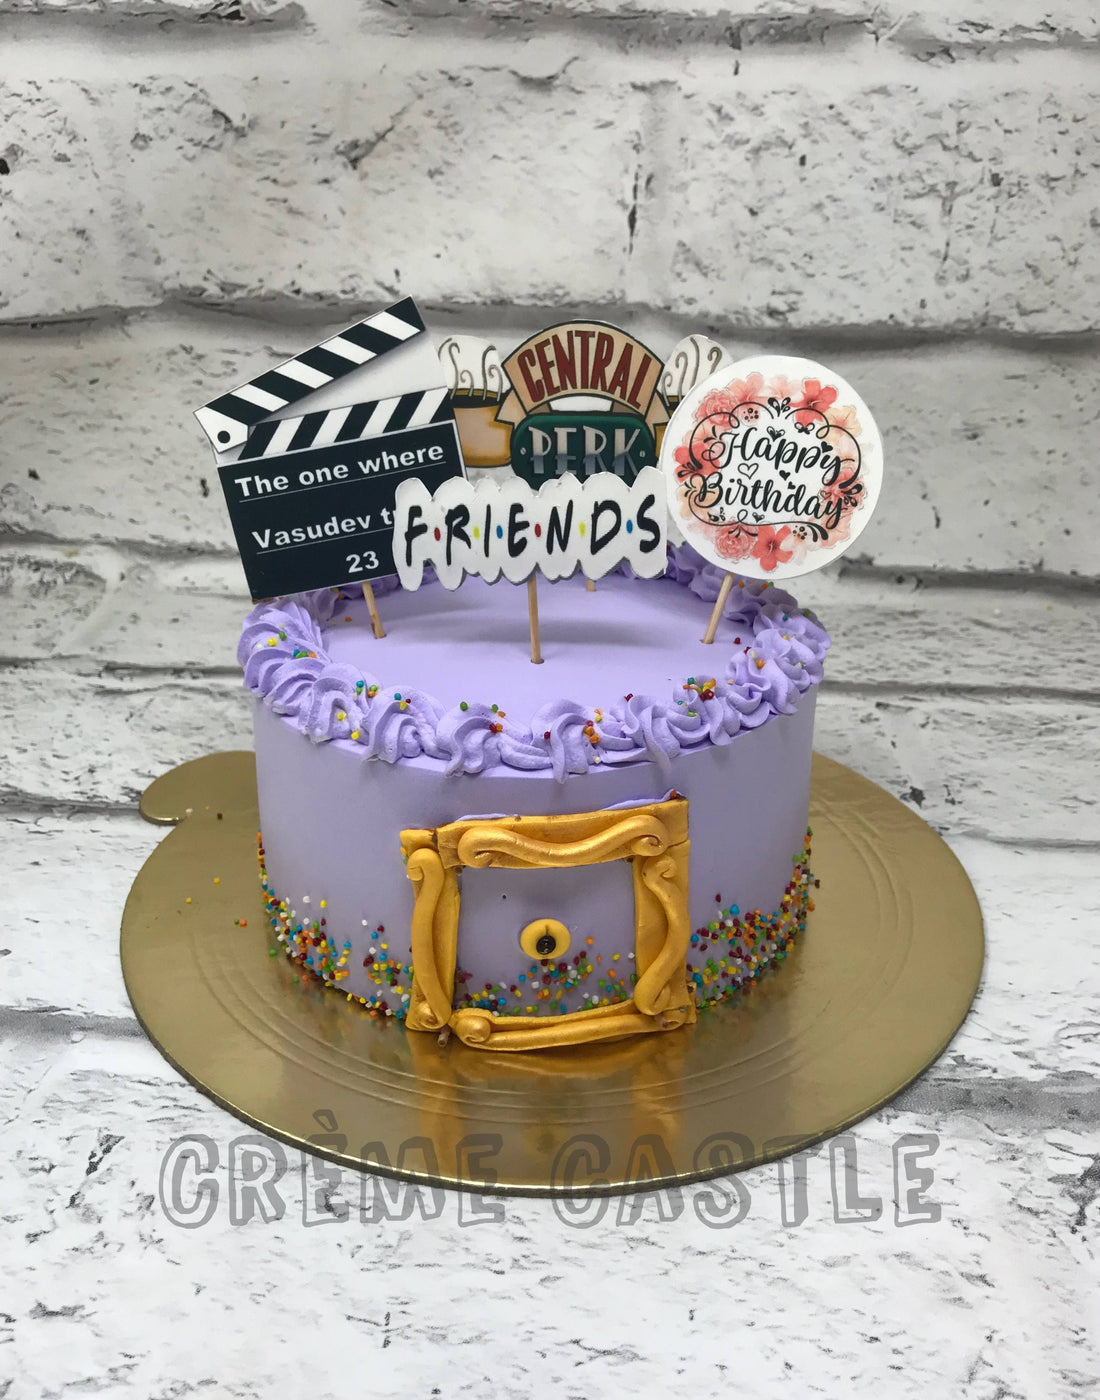 Top 999+ friends cake images – Amazing Collection friends cake images Full 4K